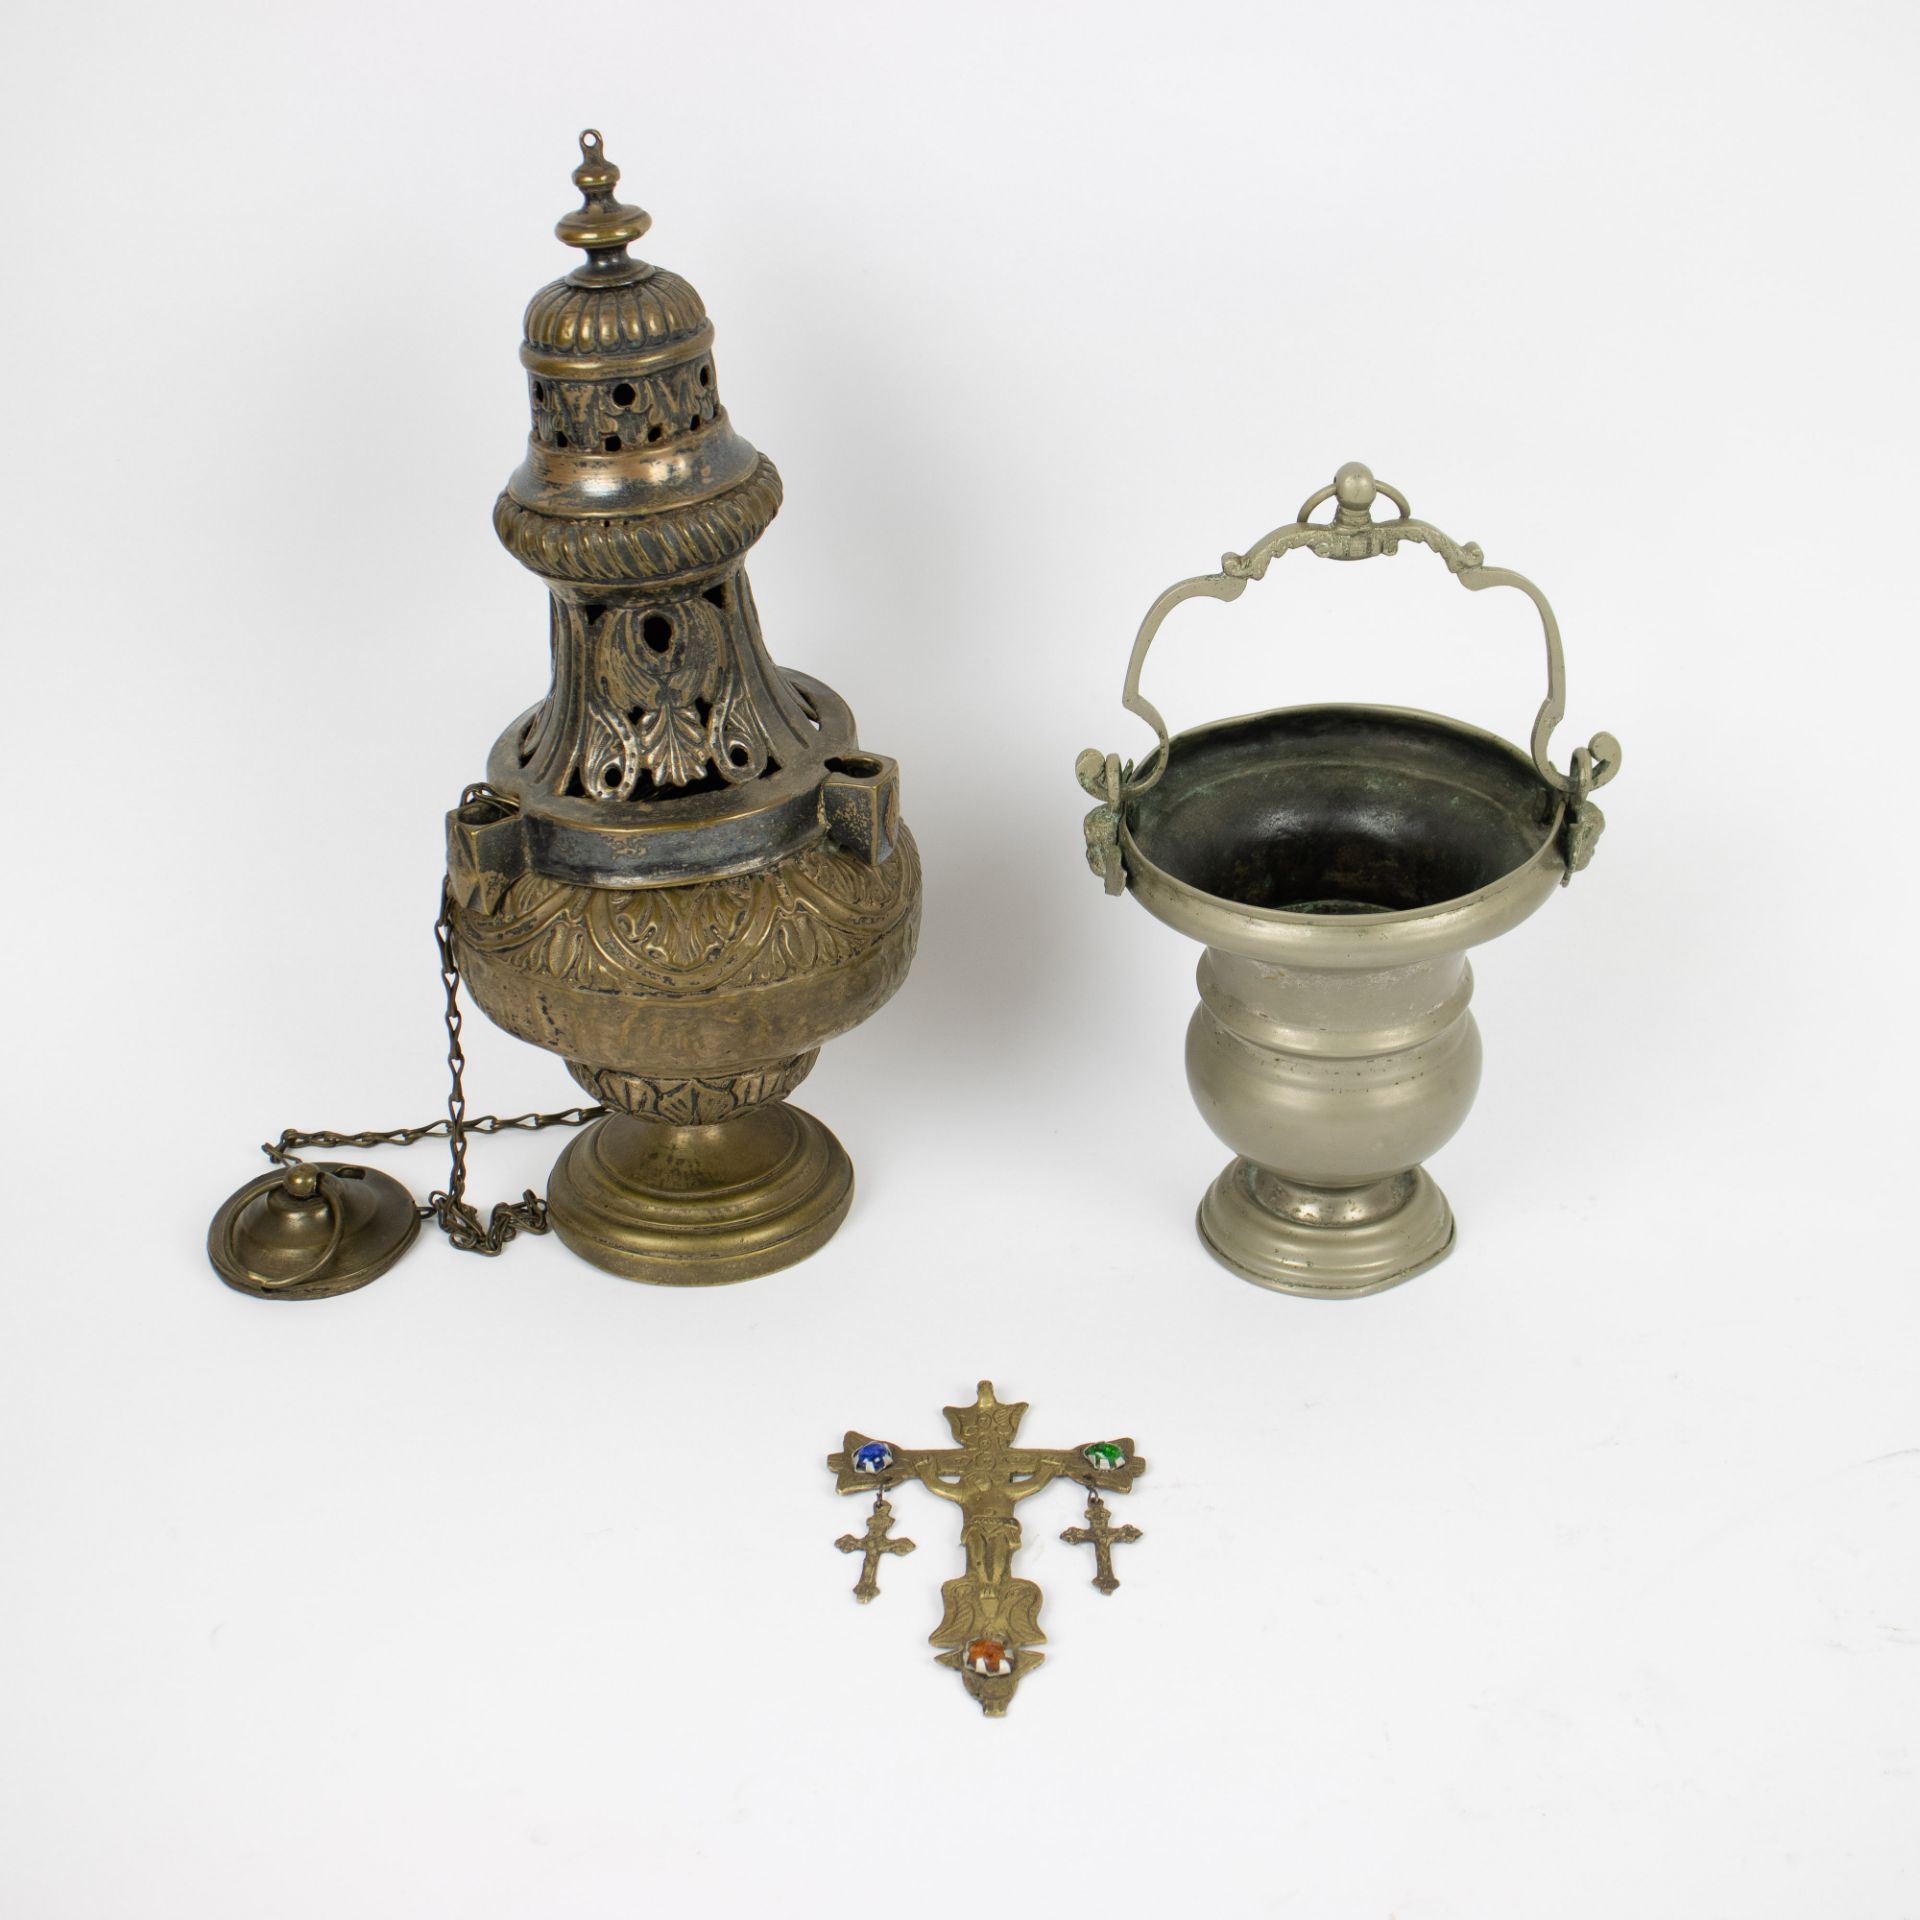 Collection of religious items